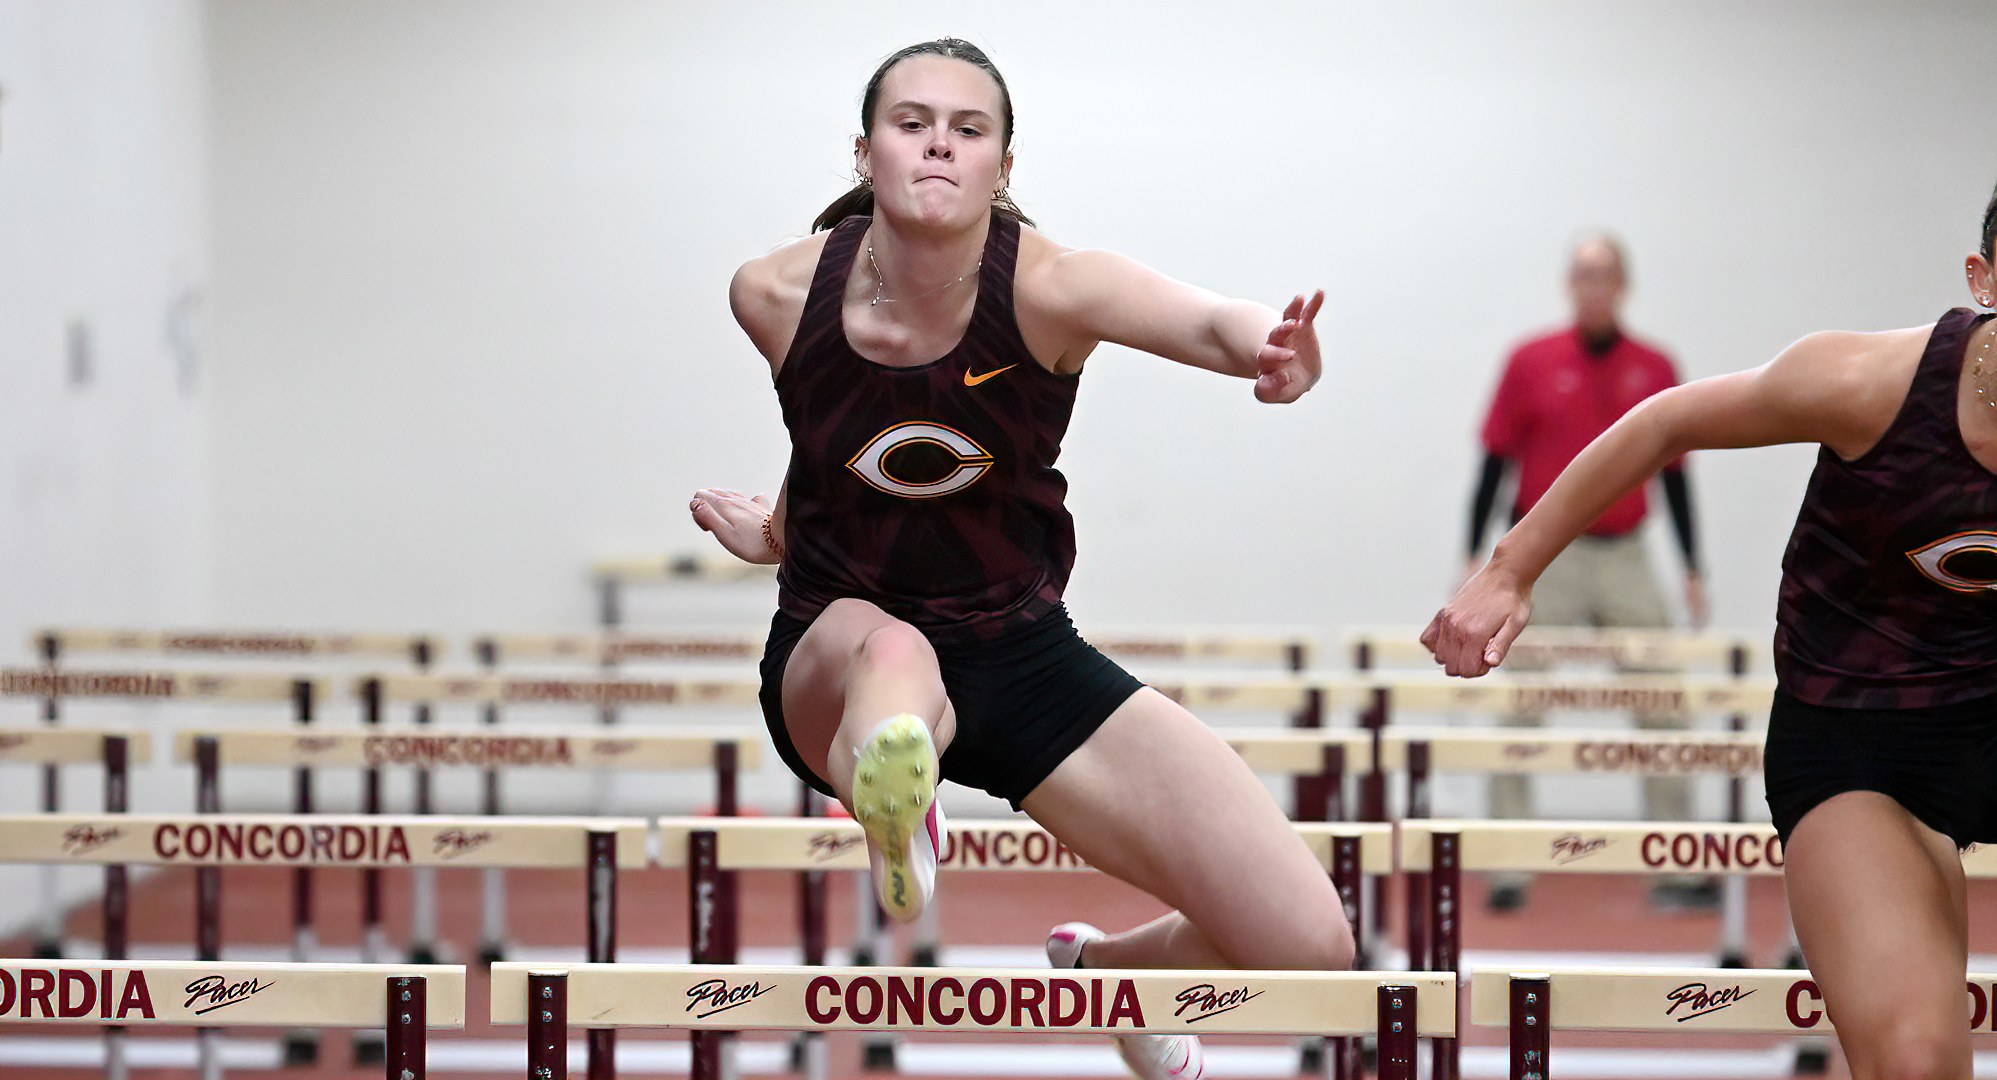 Junior Jenna Kalevik posted an MIAC Top 10 mark in the 60-meter hurdles at the UND Open. She raced to a time of 9.63.